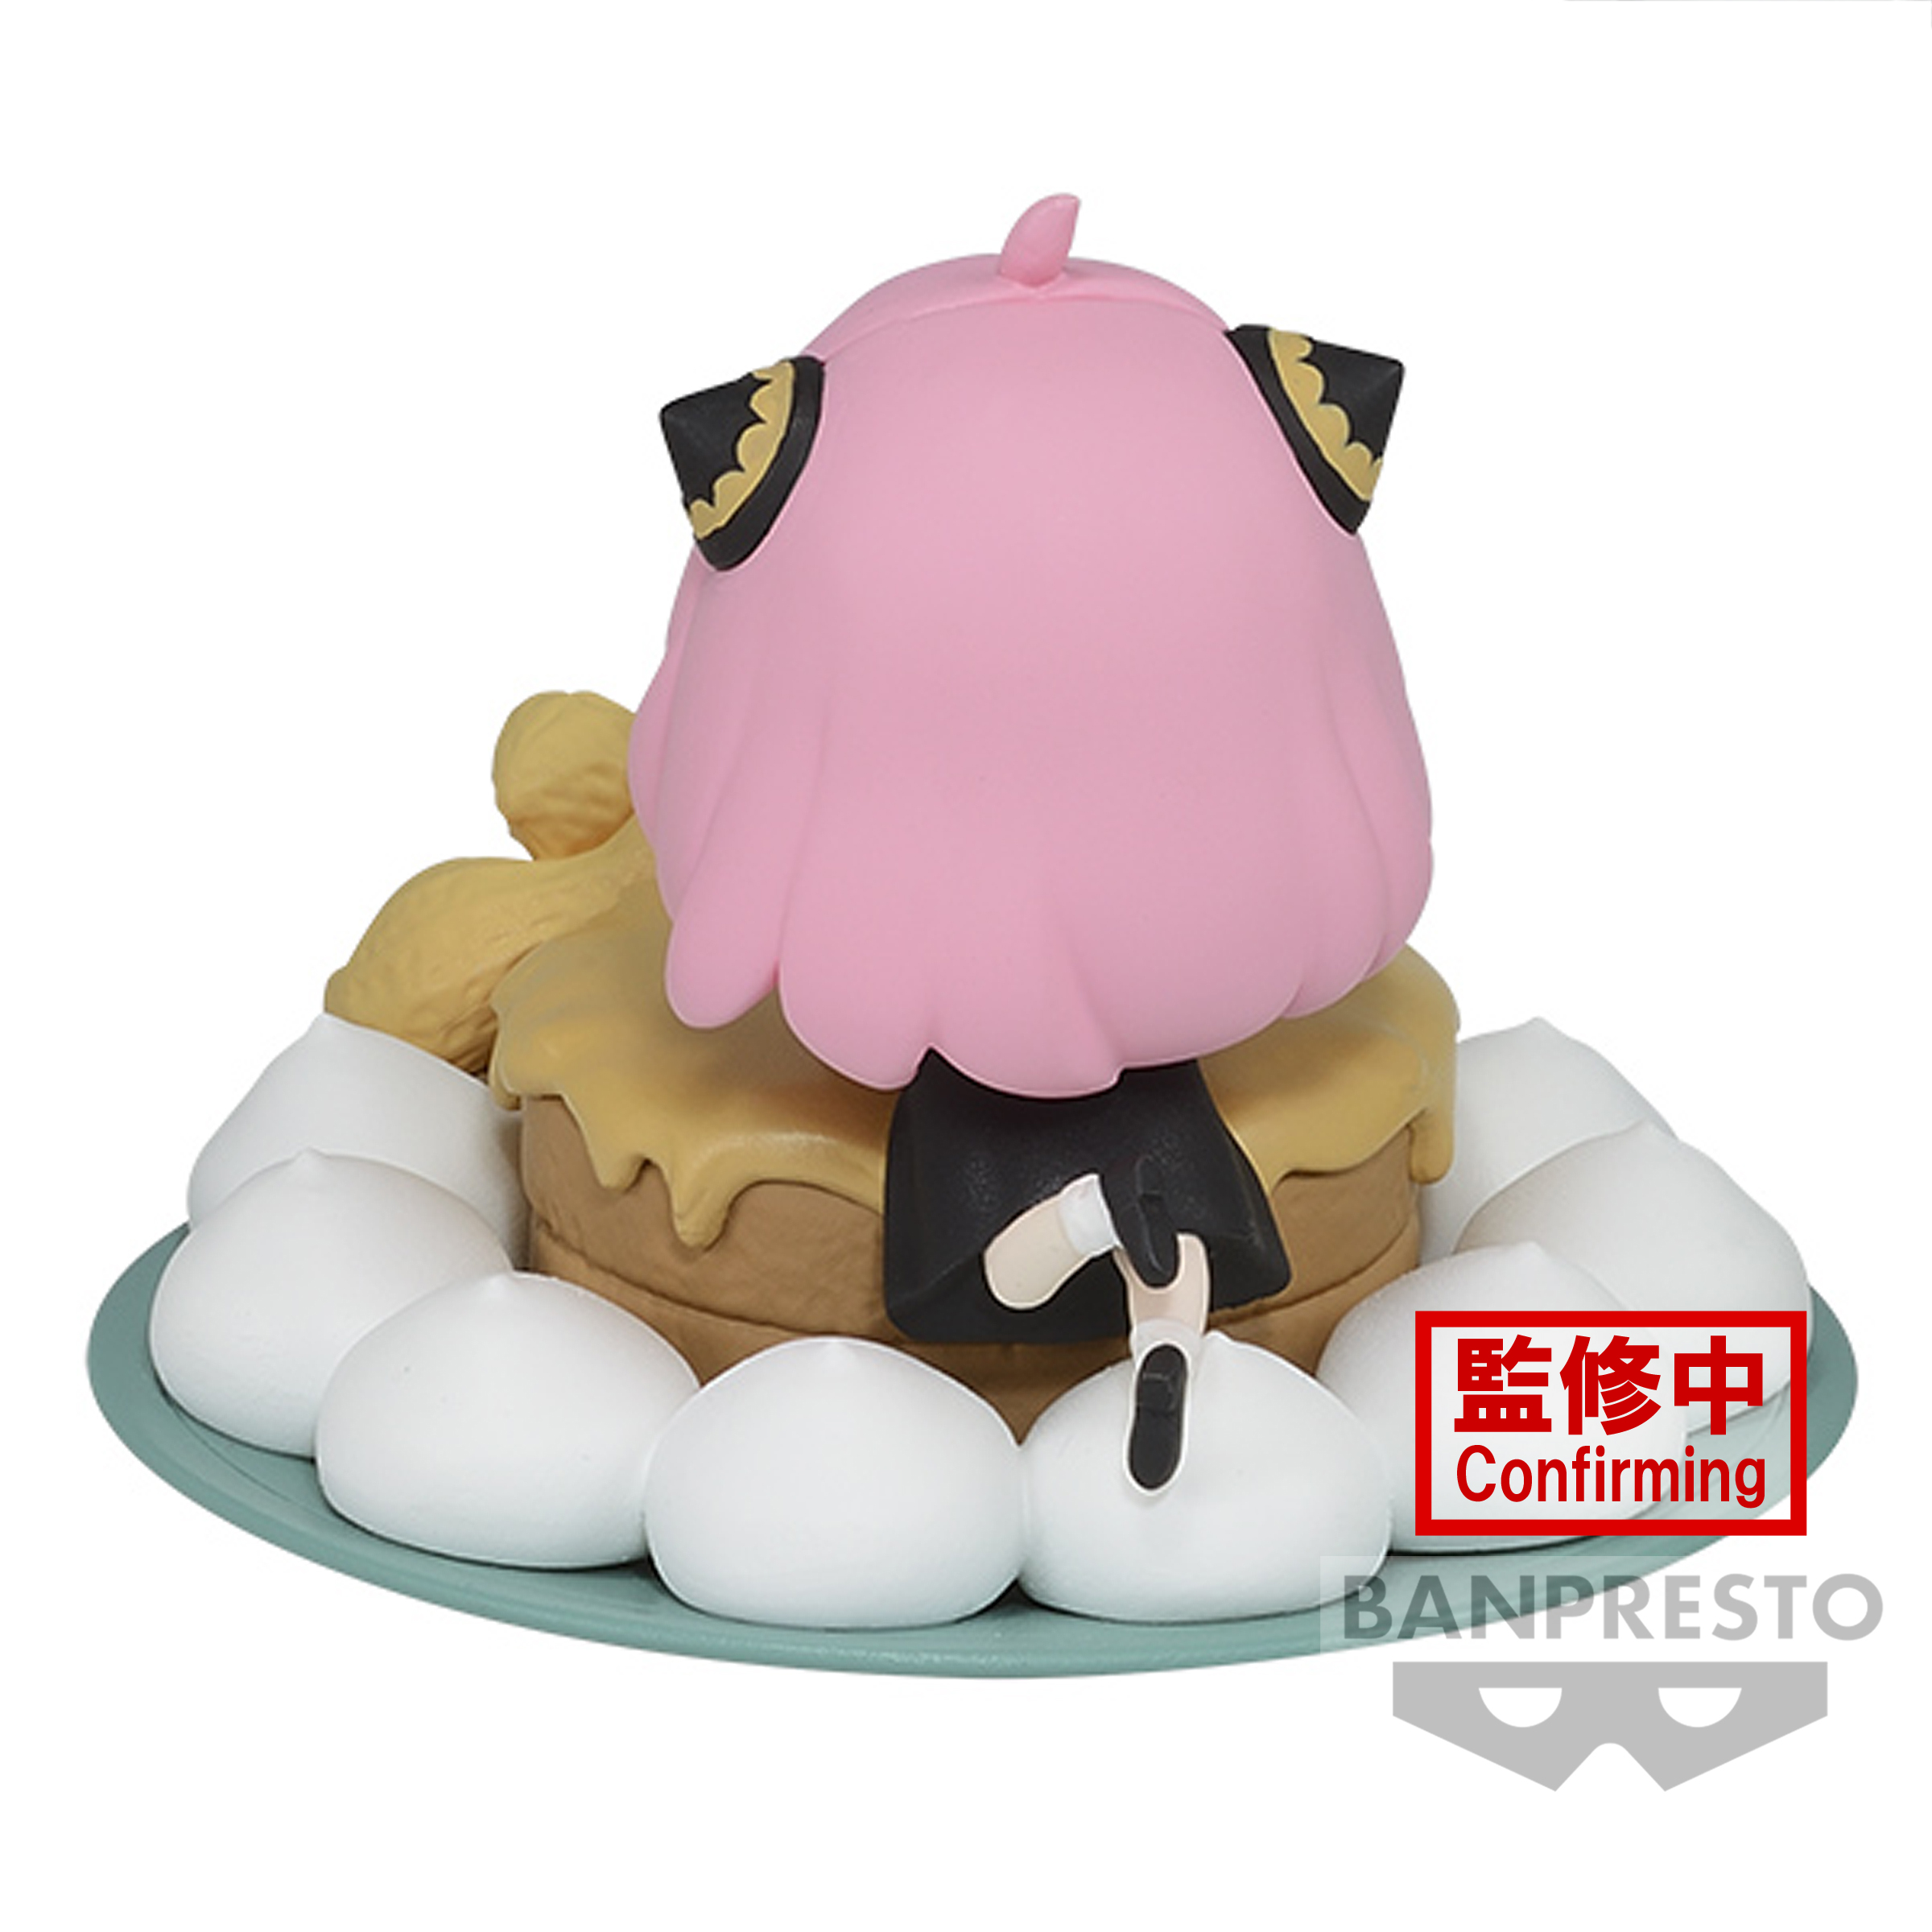 Spy X Family - Anya Forger Paldolce collection vol.1 Prize Figure (Dessert Ver.) image count 3